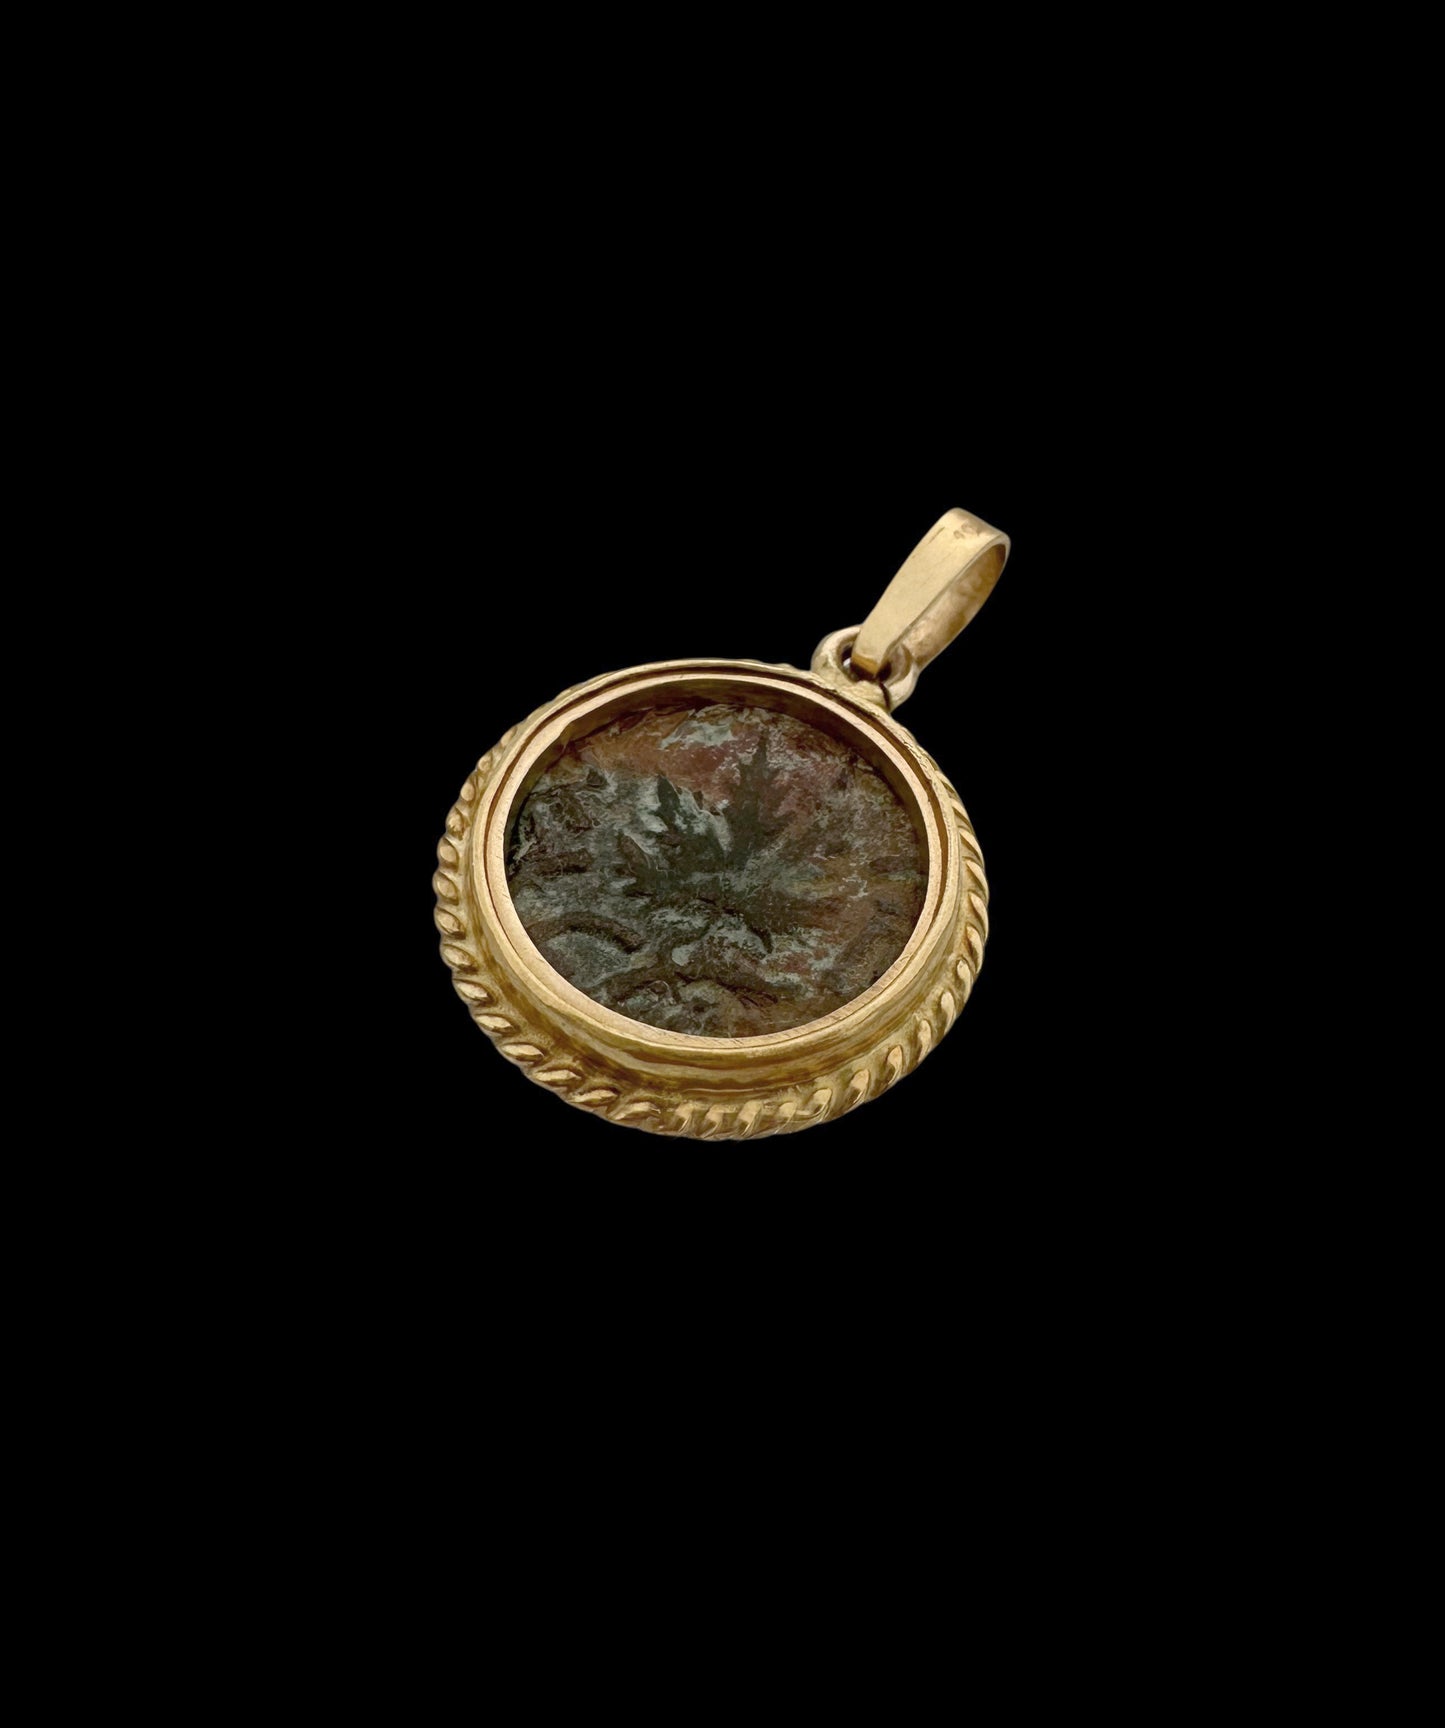 Ancient Jewish Freedom of Zion Masada Coin Set in 14K Gold Woven Pendant